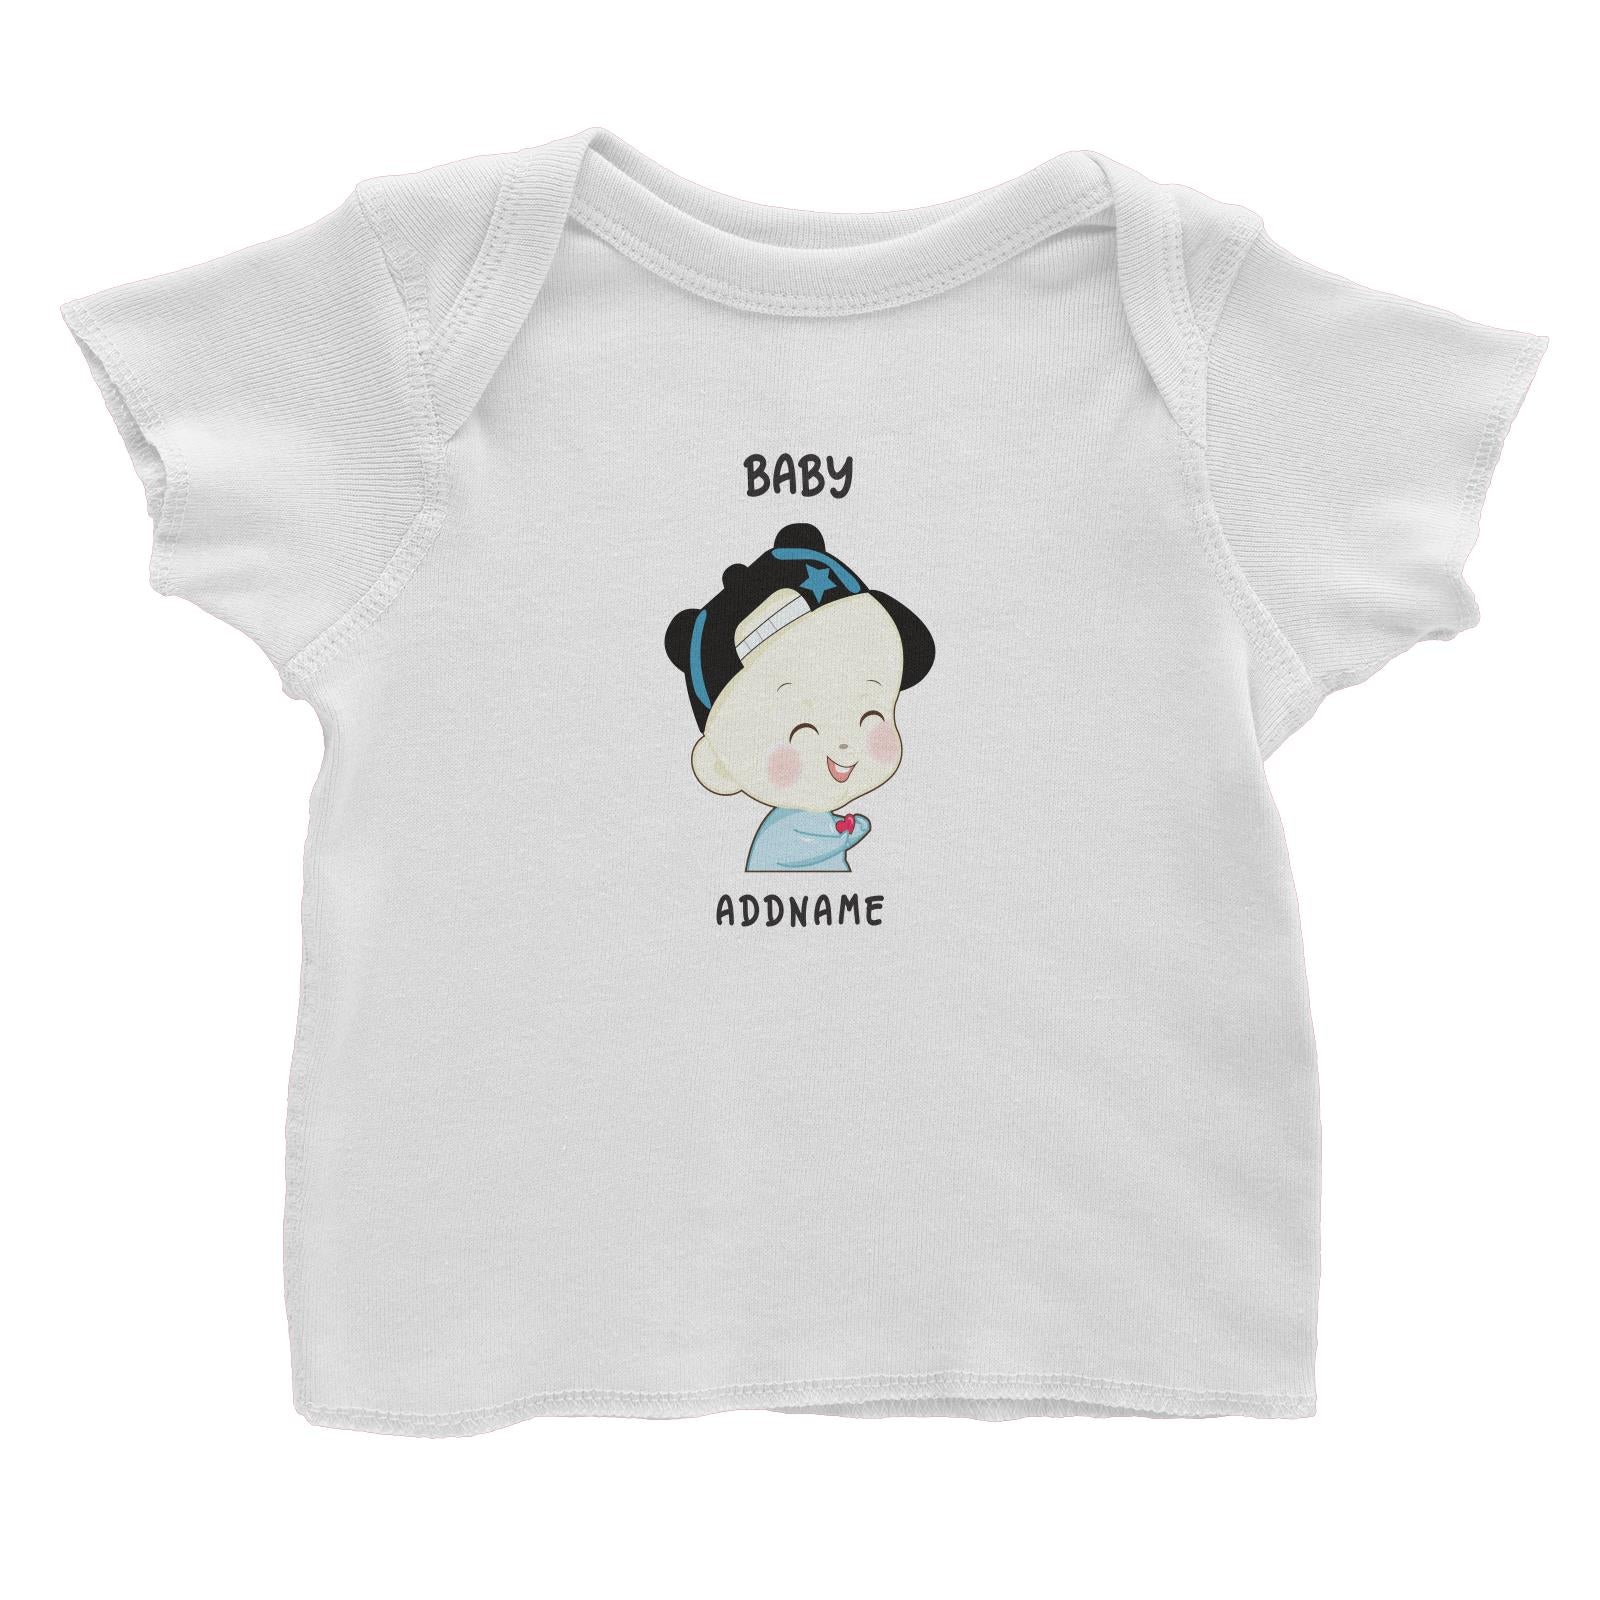 My Lovely Family Series Baby Boy Addname Baby T-Shirt (FLASH DEAL)